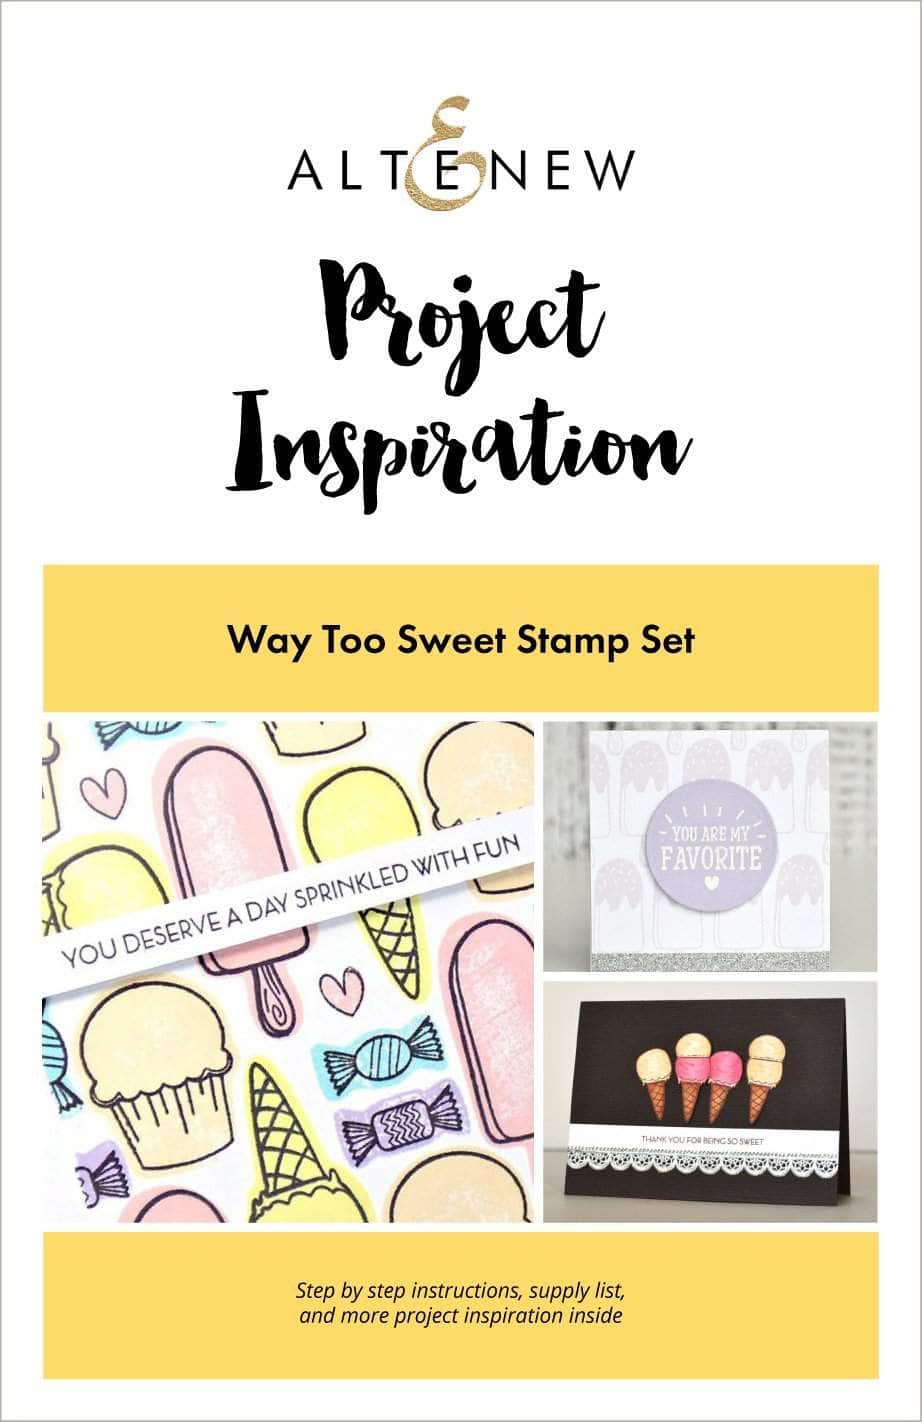 Printed Media Way Too Sweet Project Inspiration Guide